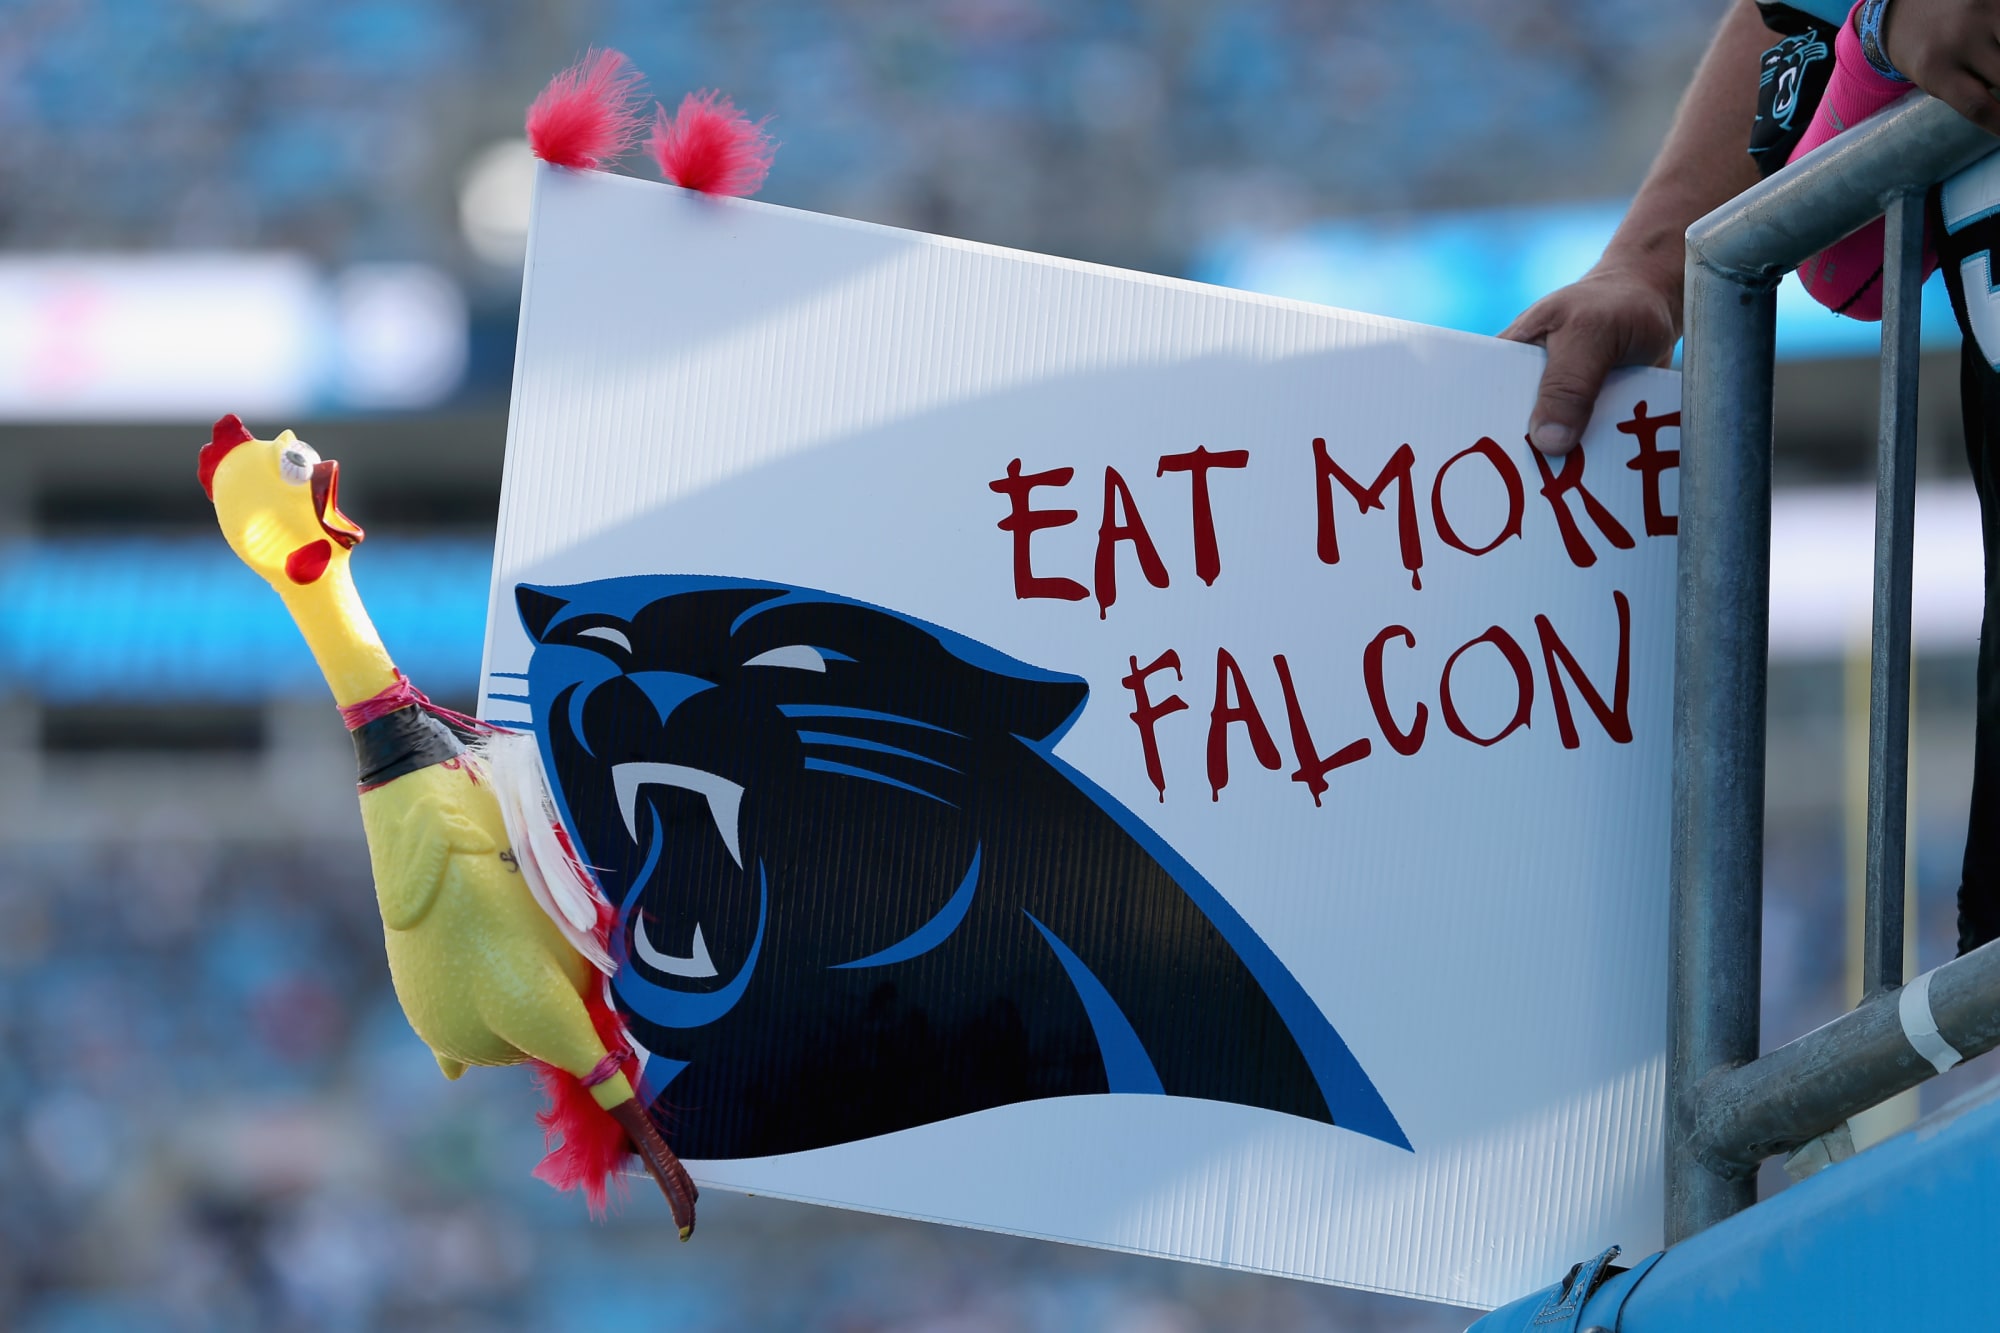 Carolina Panthers Times for preseason games finally revealed